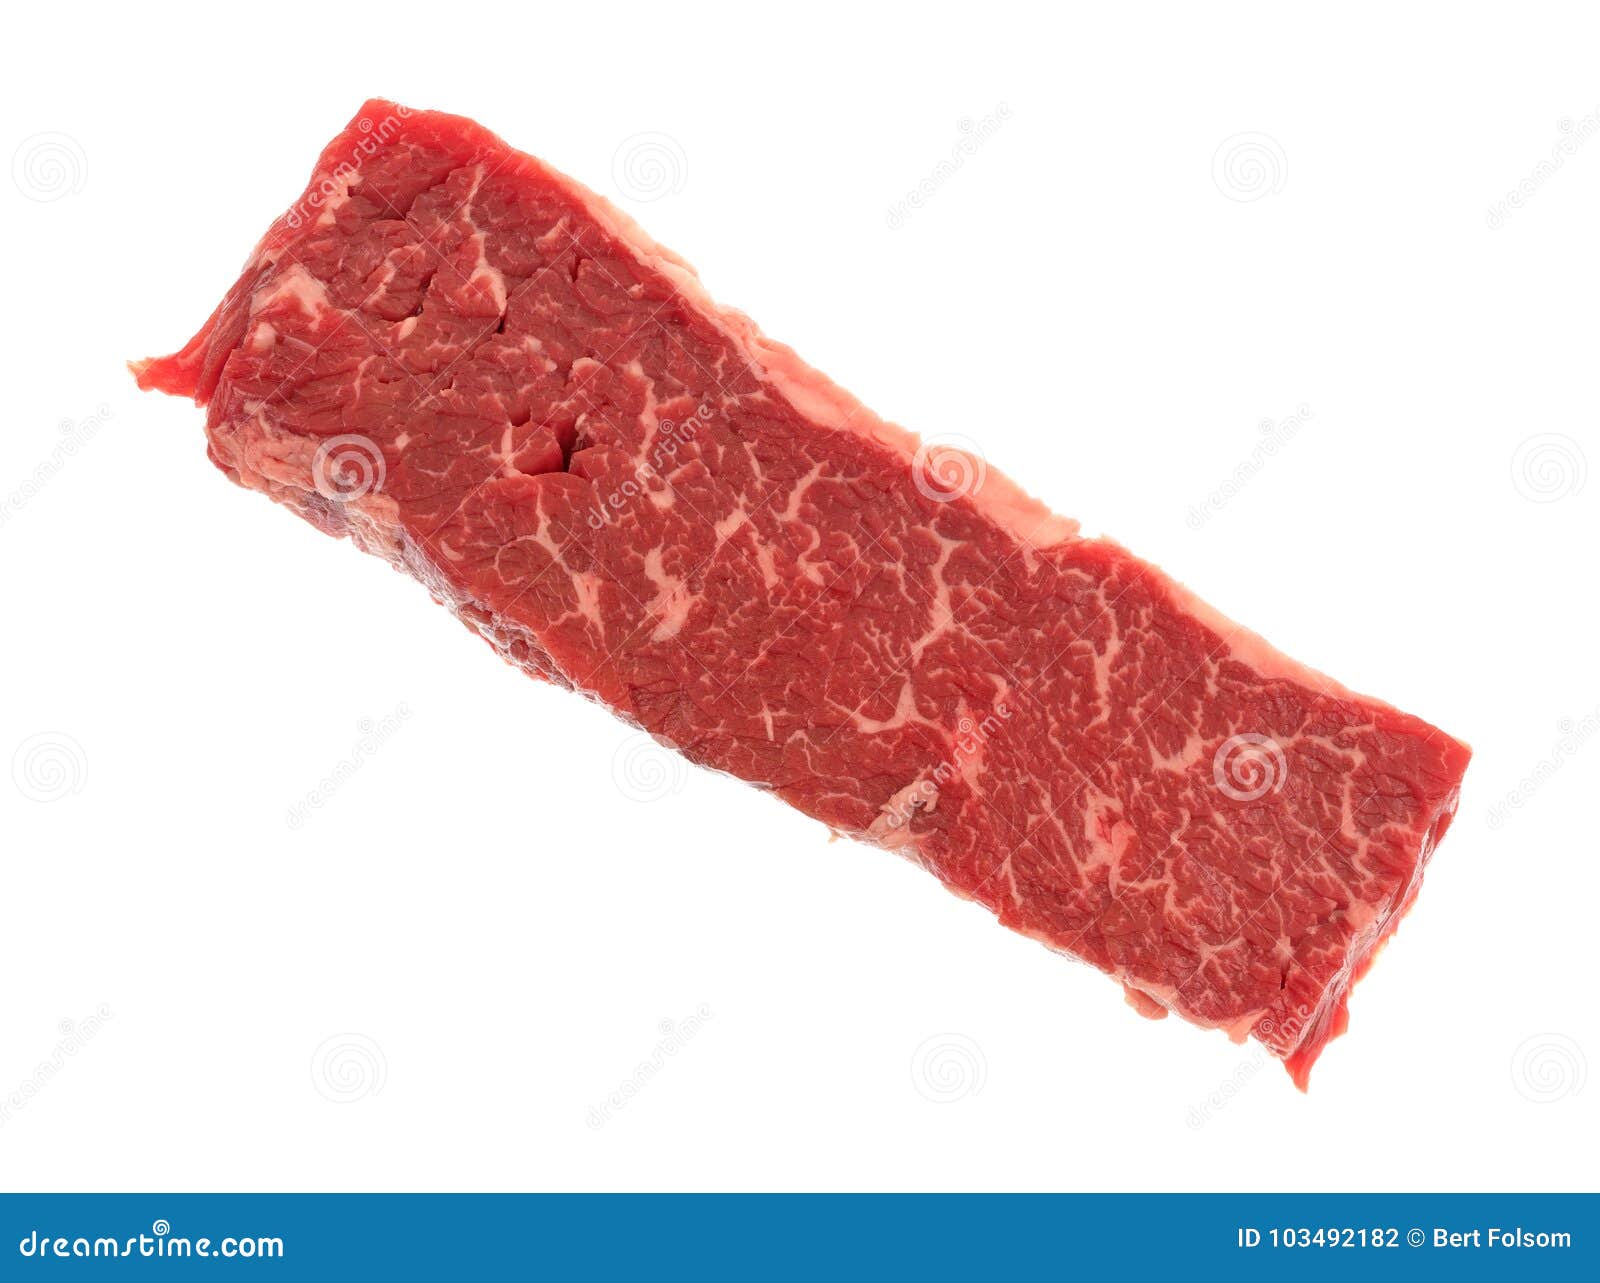 beef loin sirloin grilling tip on a white background